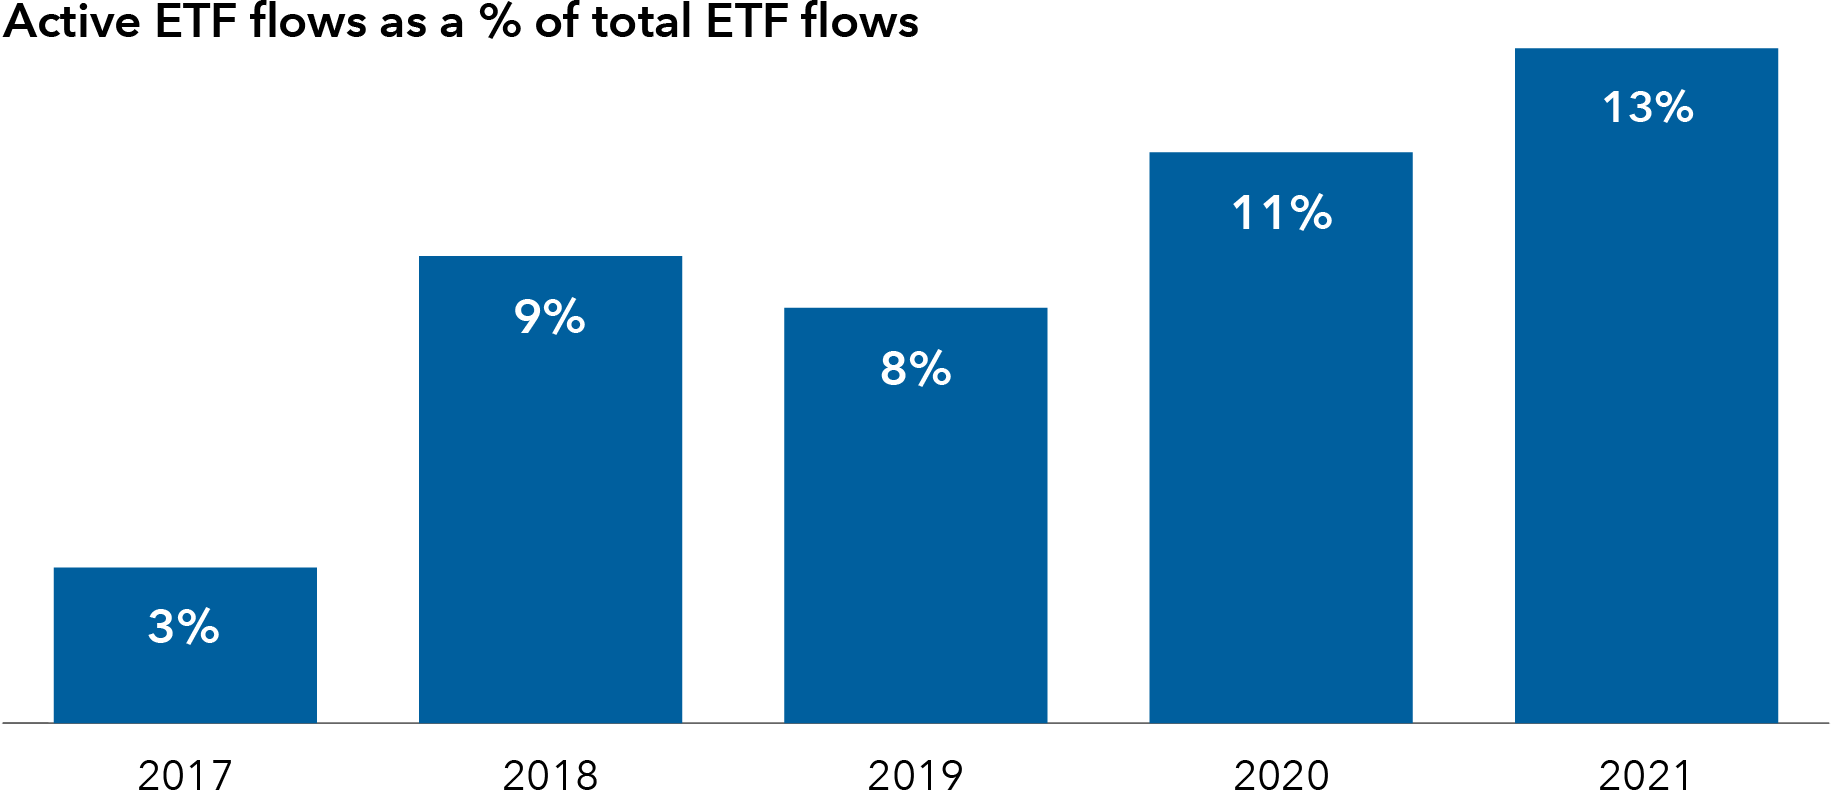 A bar chart showing the percentage of ETF flows represented by active ETFs per year from 2017 to 2021. In 2017, active ETFs represented just 3% of inflows into ETFs. In 2018, active represented 9%, then 8% in 2019, 11% in 2020, and 13% in 2021. 